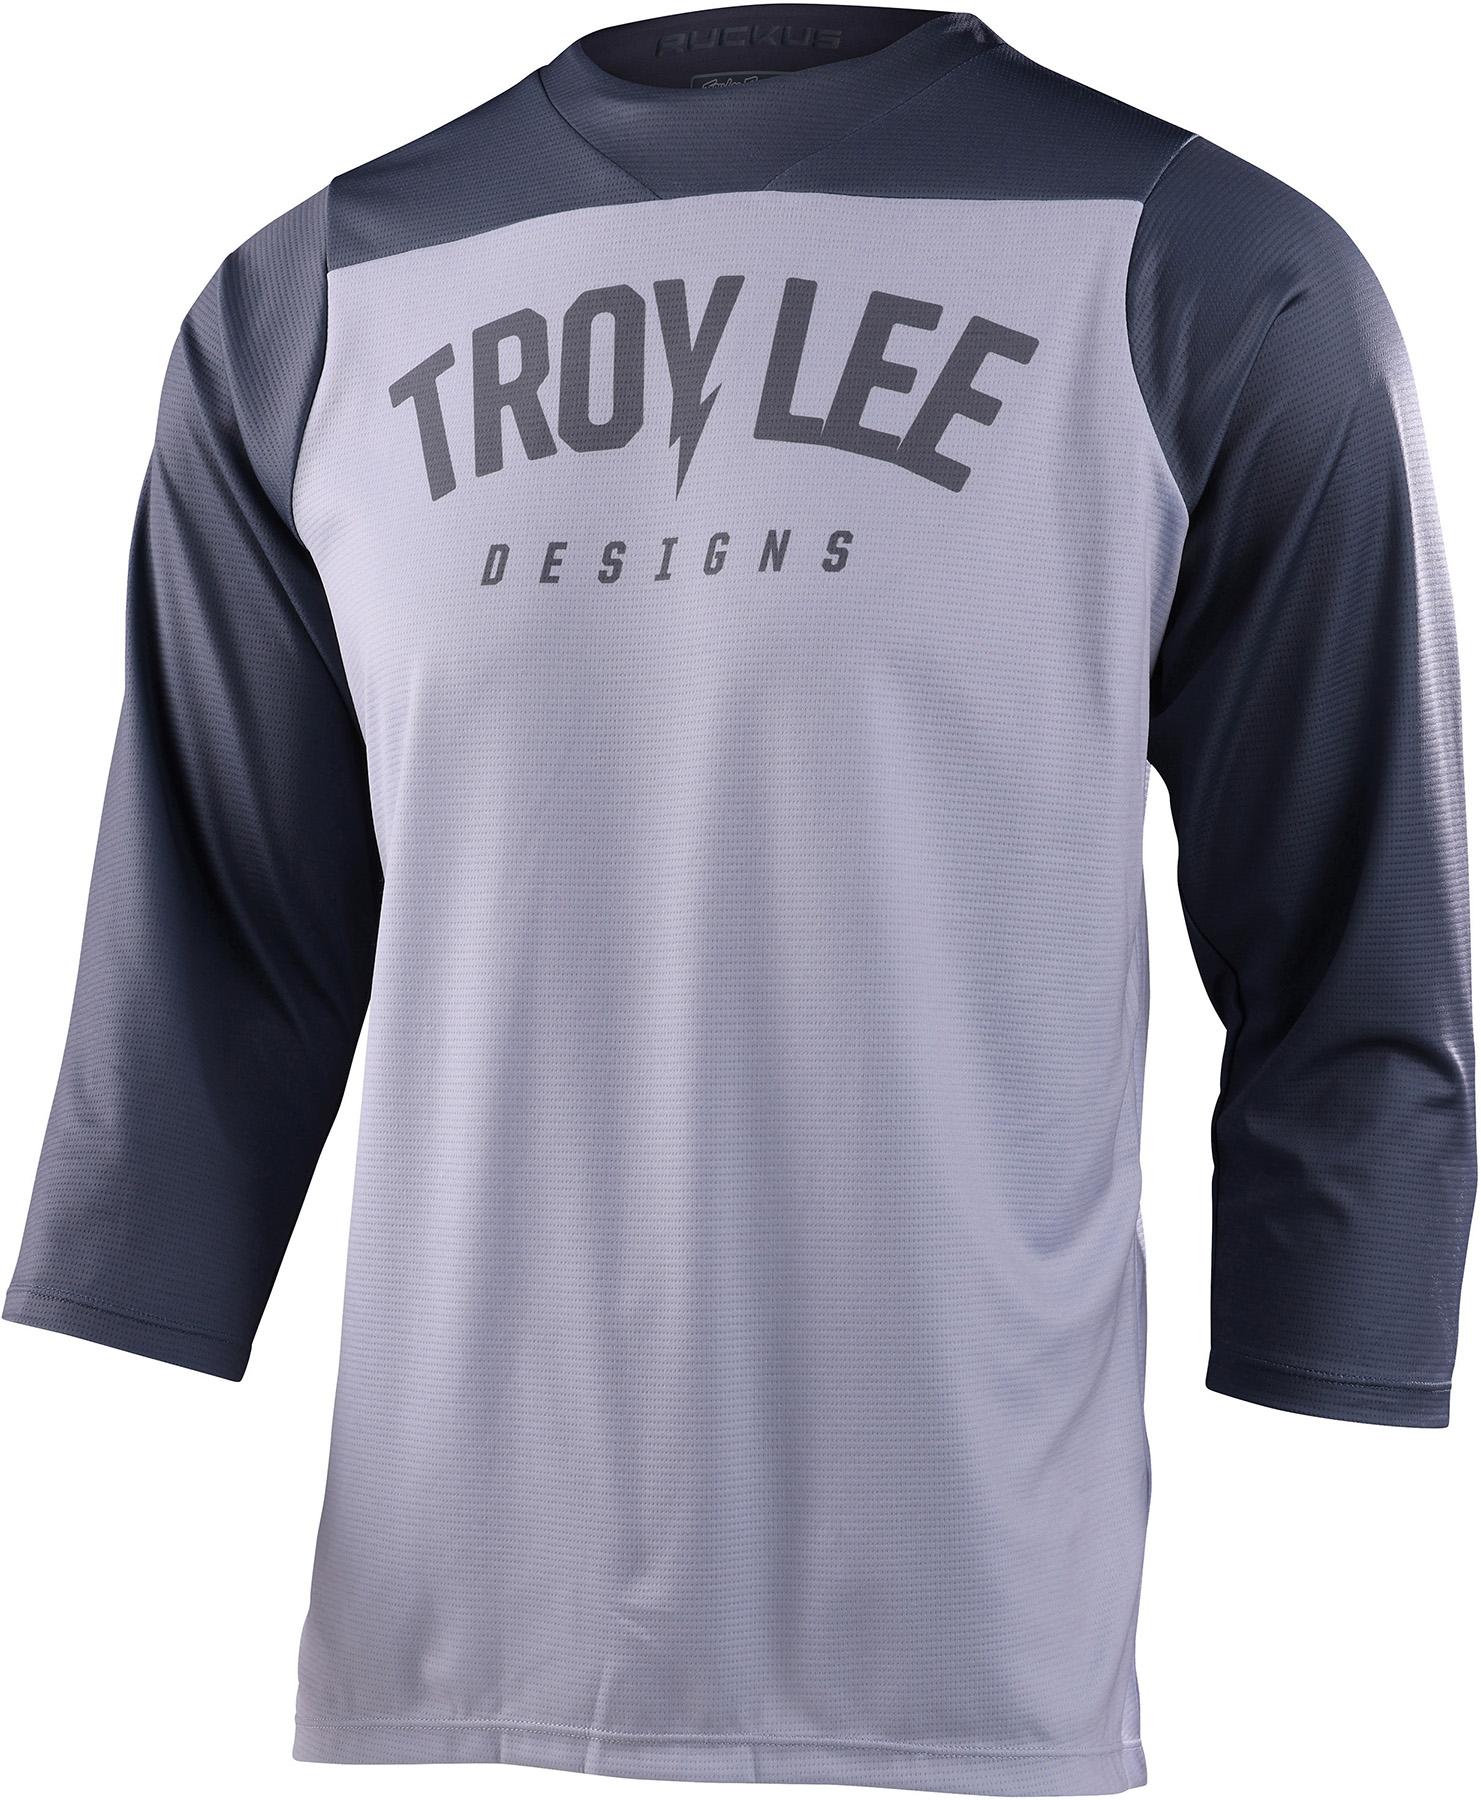 Troy Lee Designs Ruckus Camber Cycling Jersey - Camber Light Grey